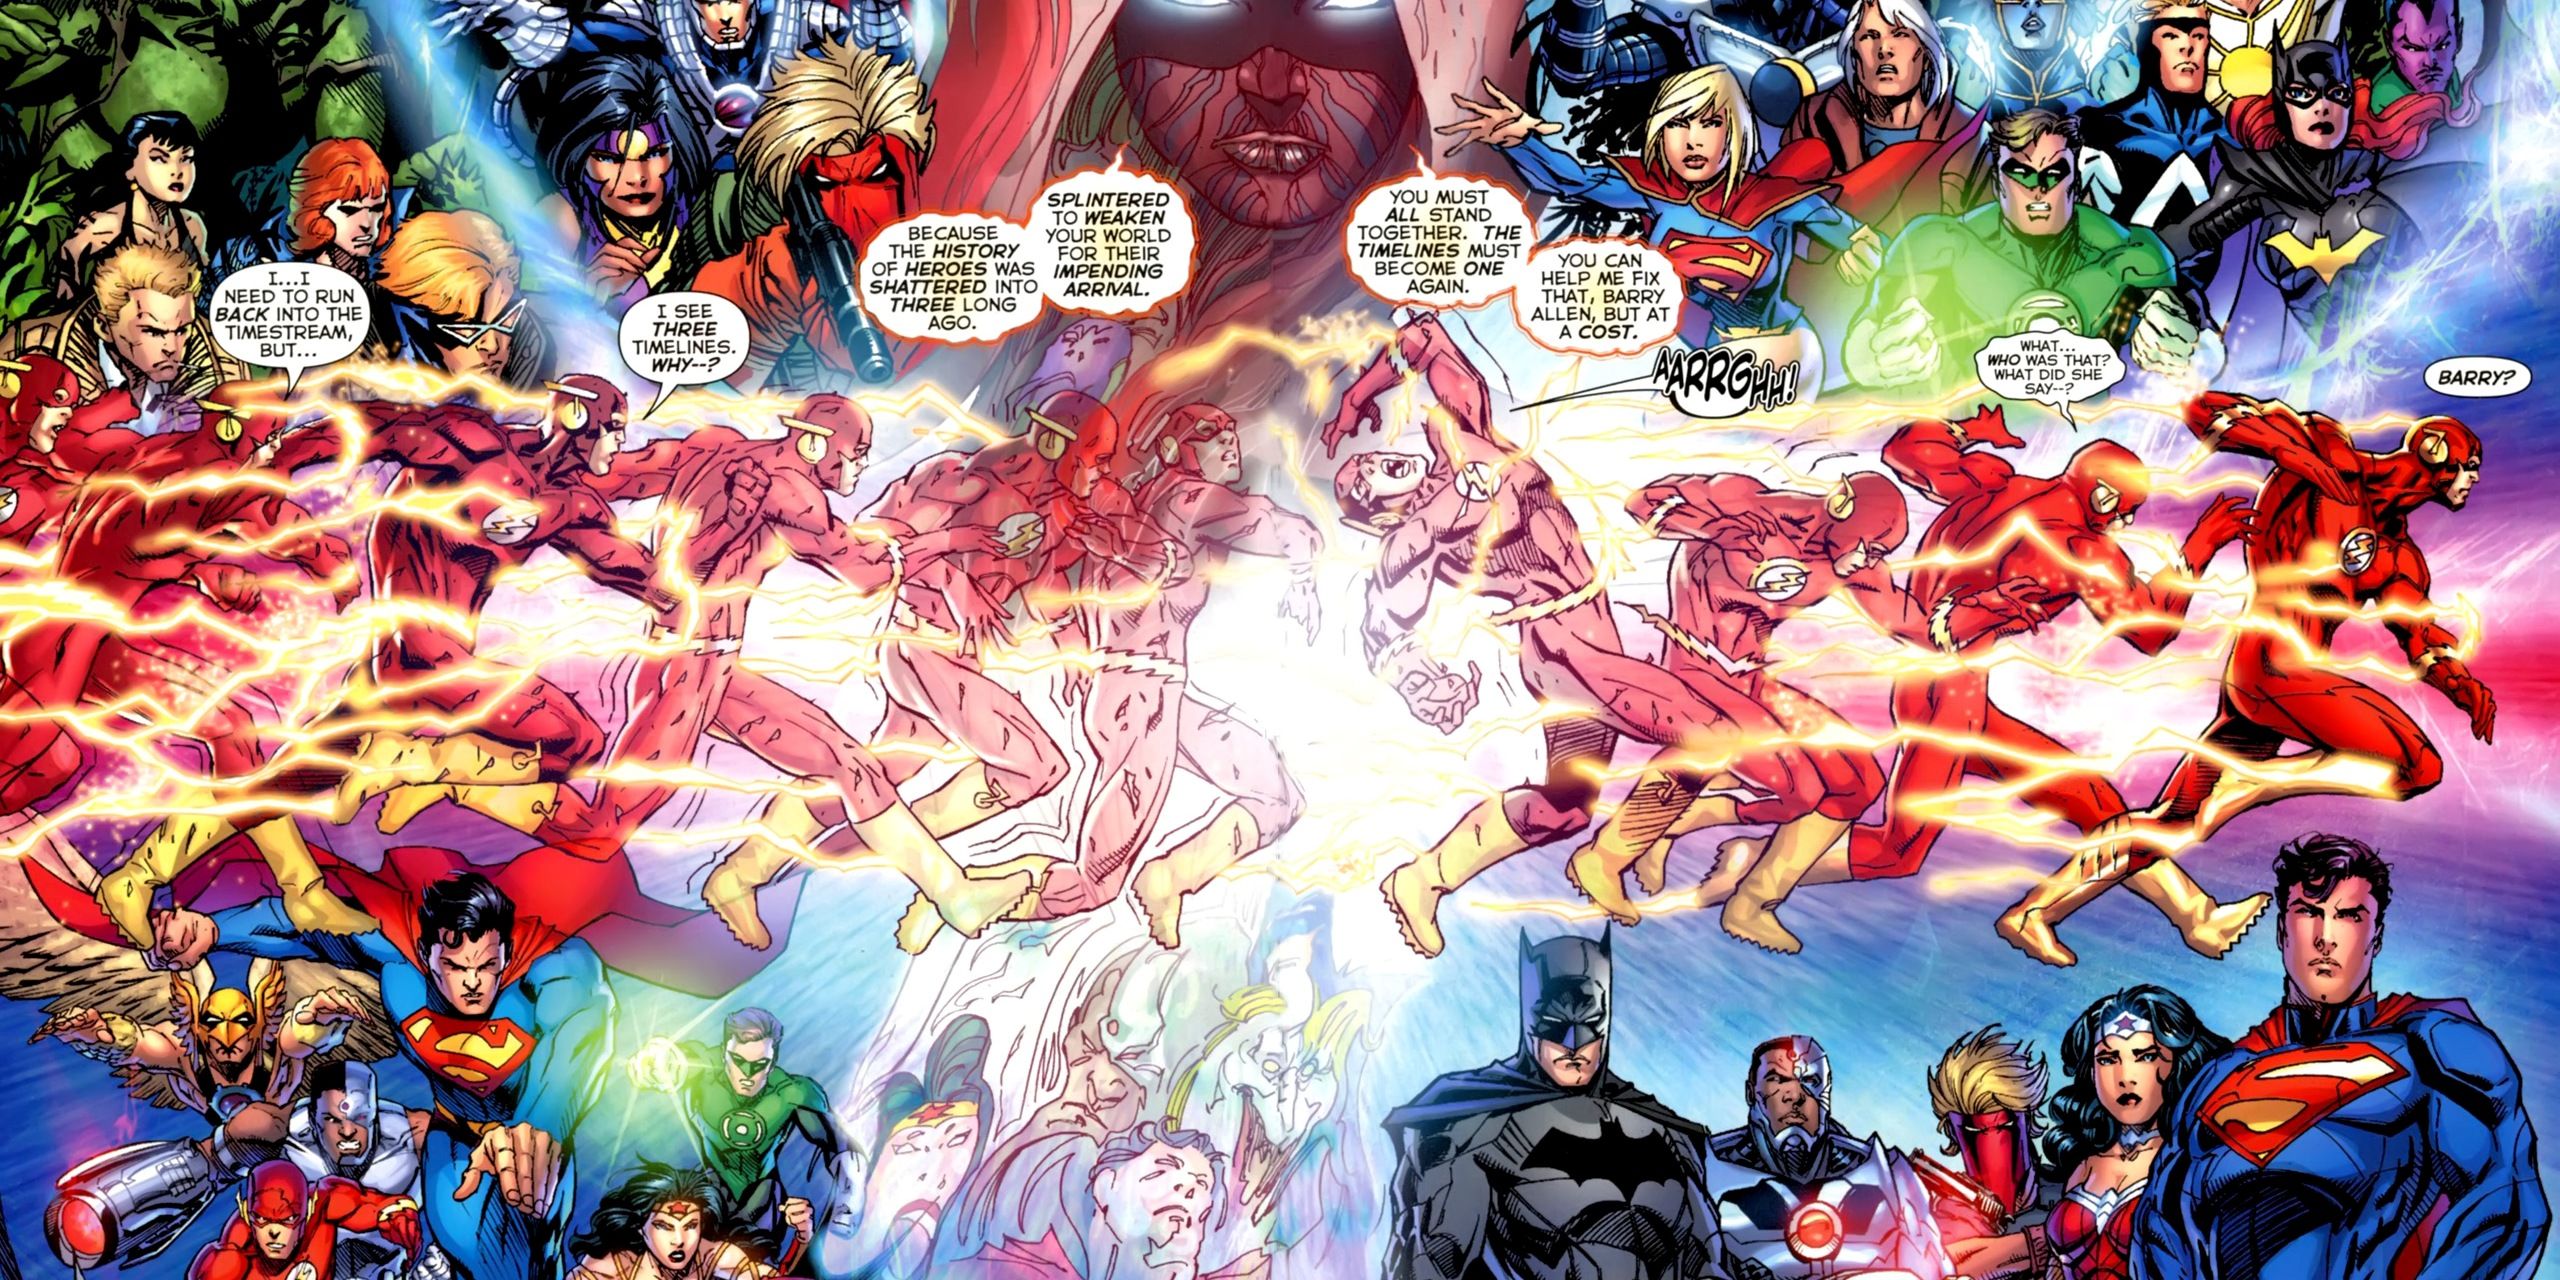 Pandora and the Flash create the New 52